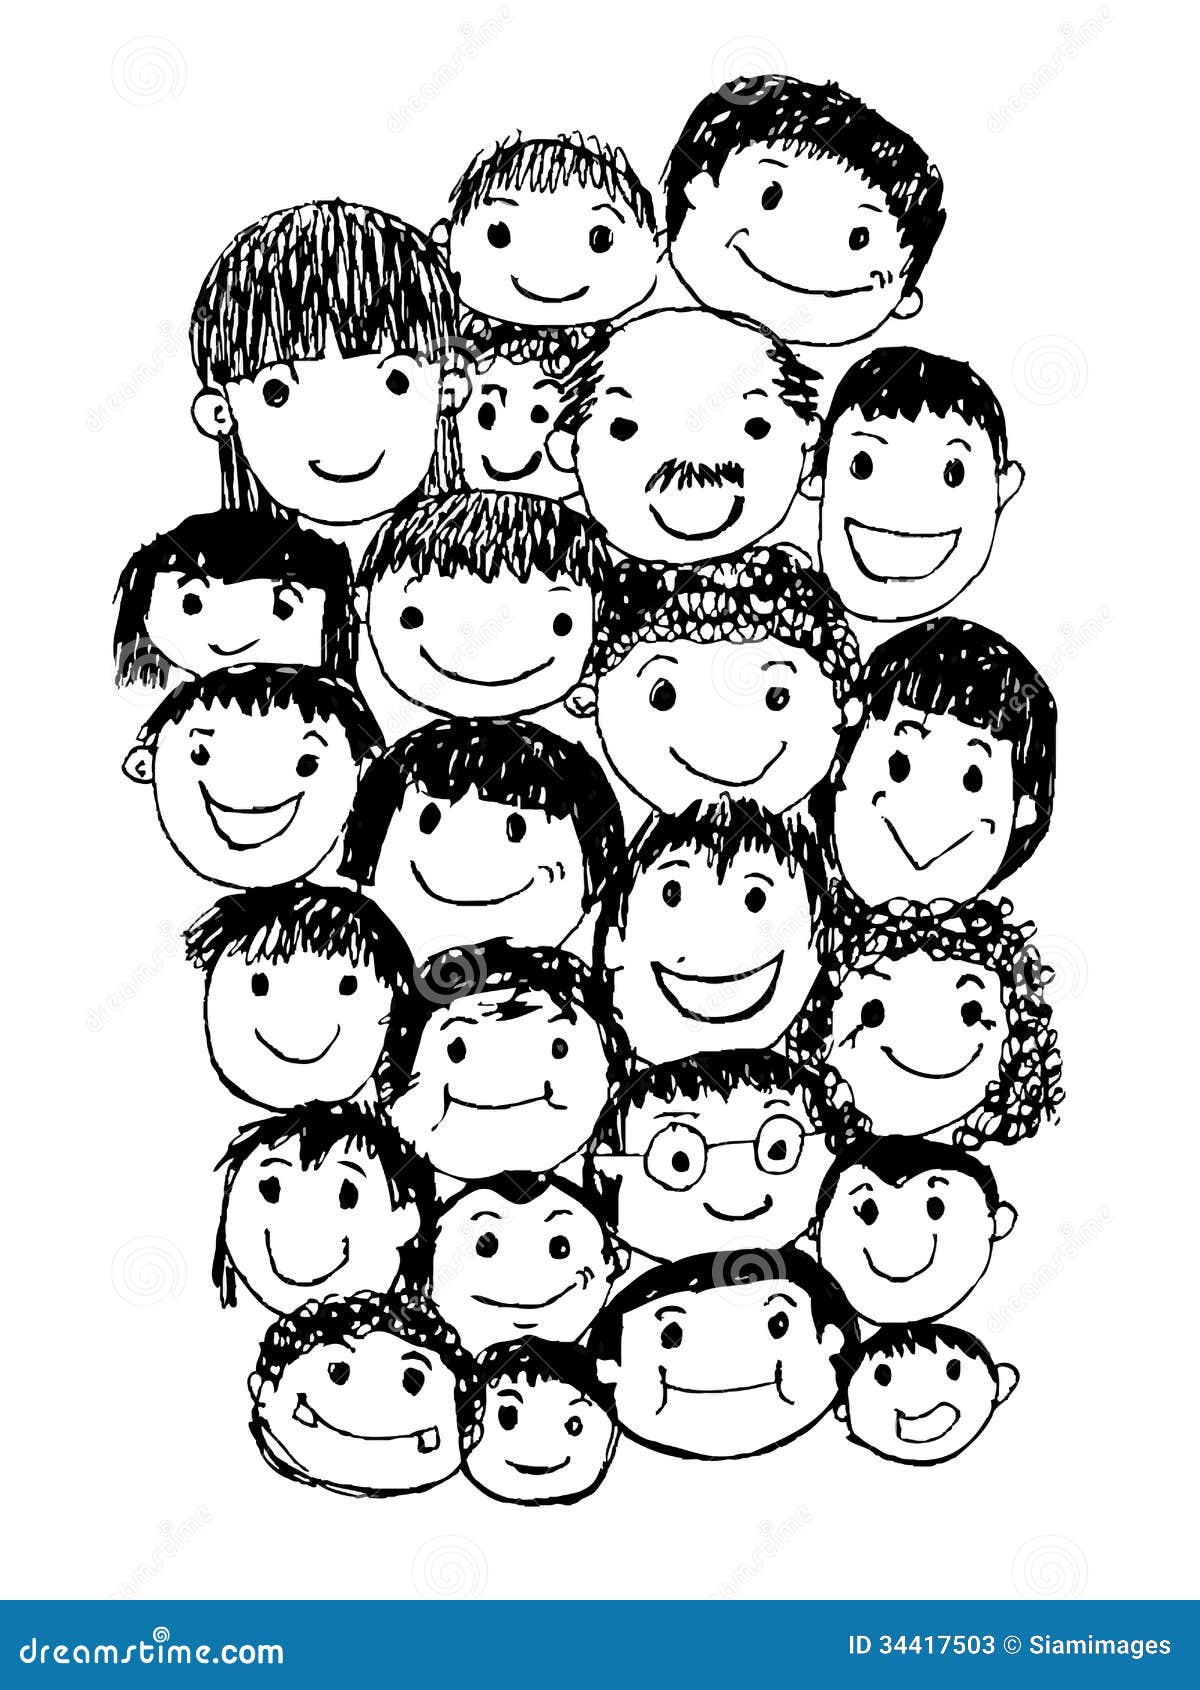 Crowd, human silhouettes, black and white drawing free image download